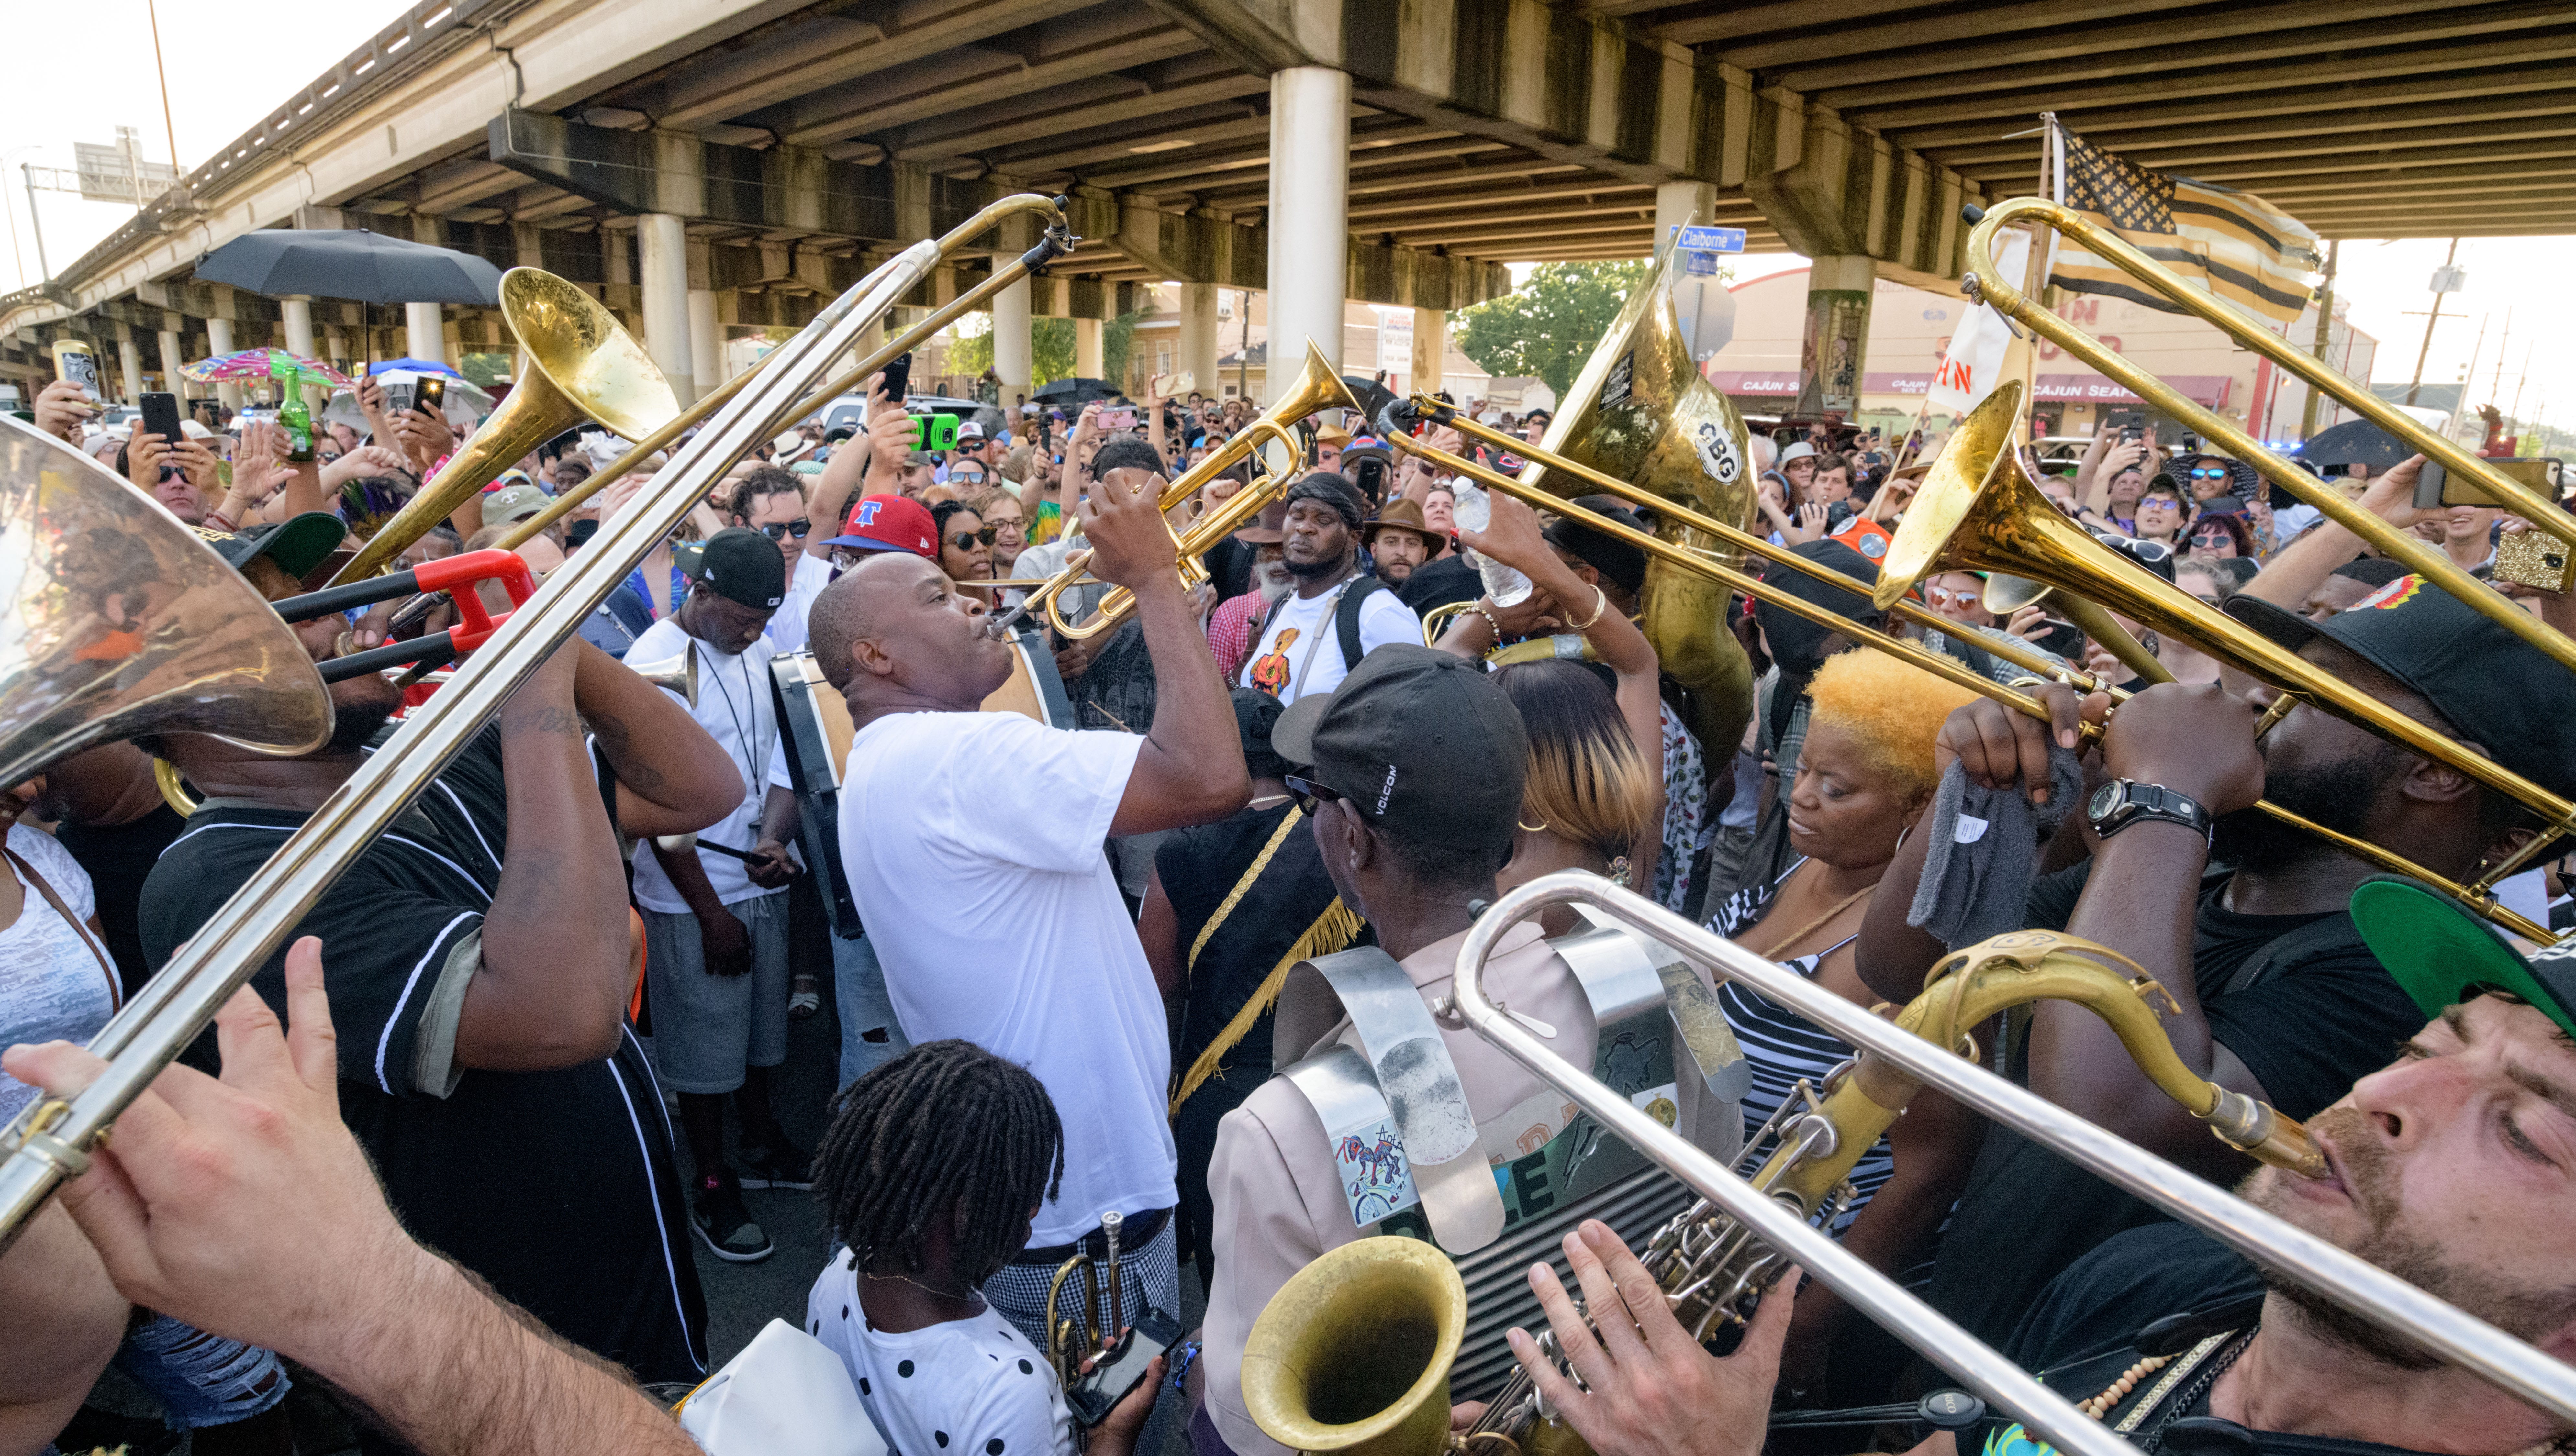 A memorial second line for Dr. John also known as Malcolm John Rebennack (November 20, 1941 – June 6, 2019) takes place in the Treme neighborhood of New Orleans lead by trumpeter James Andrews, center, starting from Ernie K-Doe’s Mother-in-Law Lounge owned by trumpeter Kermit Ruffins in New Orleans, La. Friday, June 7, 2019. Dr. John was a Rock &amp; Roll Hall of Fame musician blending blues, jazz, funk, pop, boogie woogie and rock and roll. Photo by Matthew Hinton